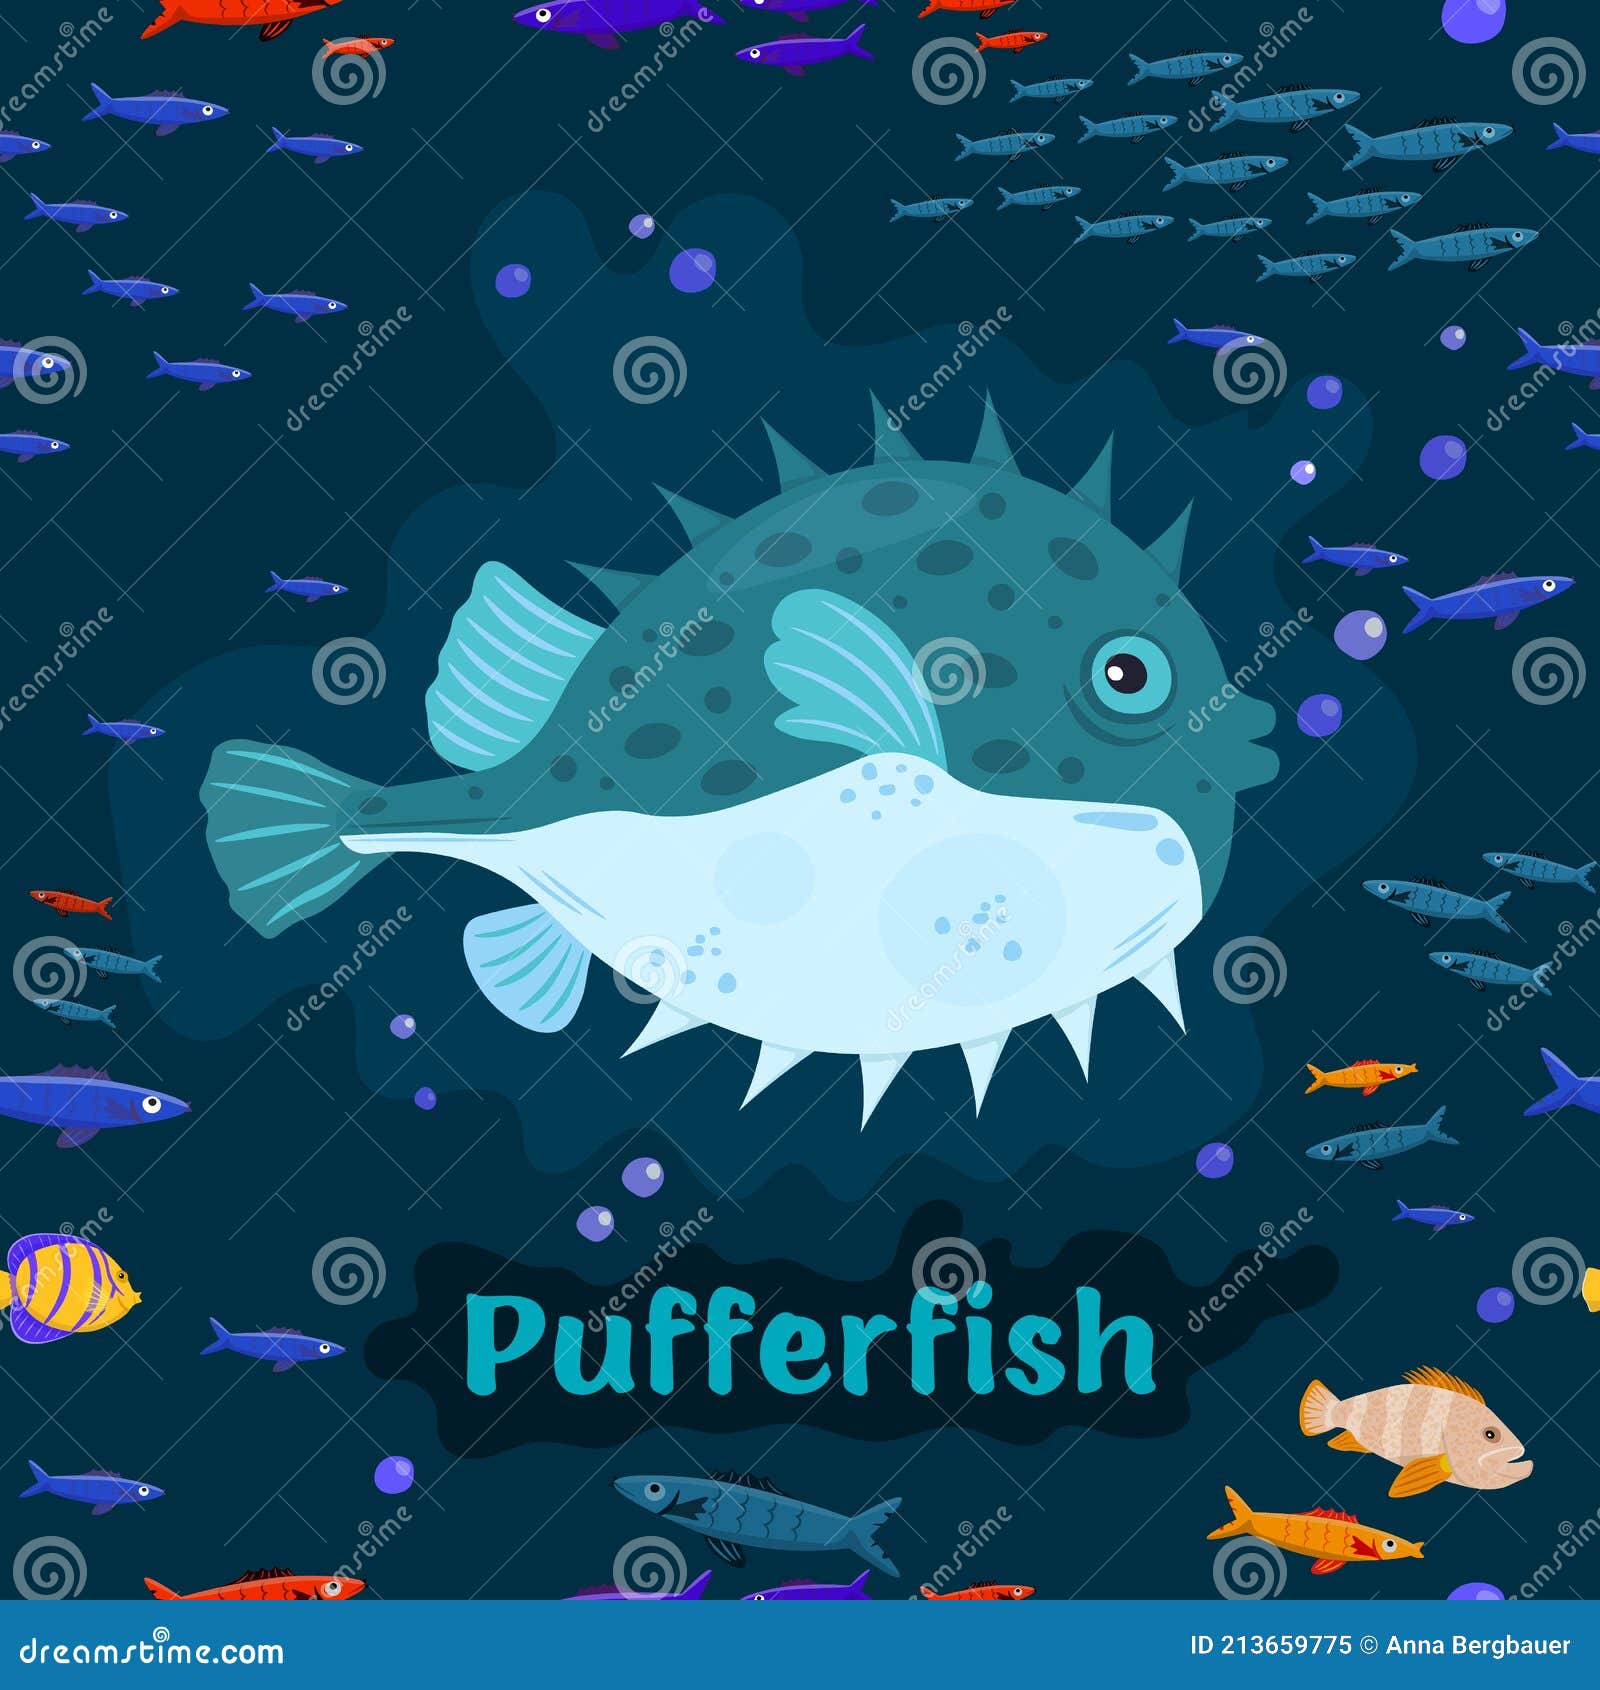 Pufferfish Endangered Fish Species Concept Vector Illustration Stock